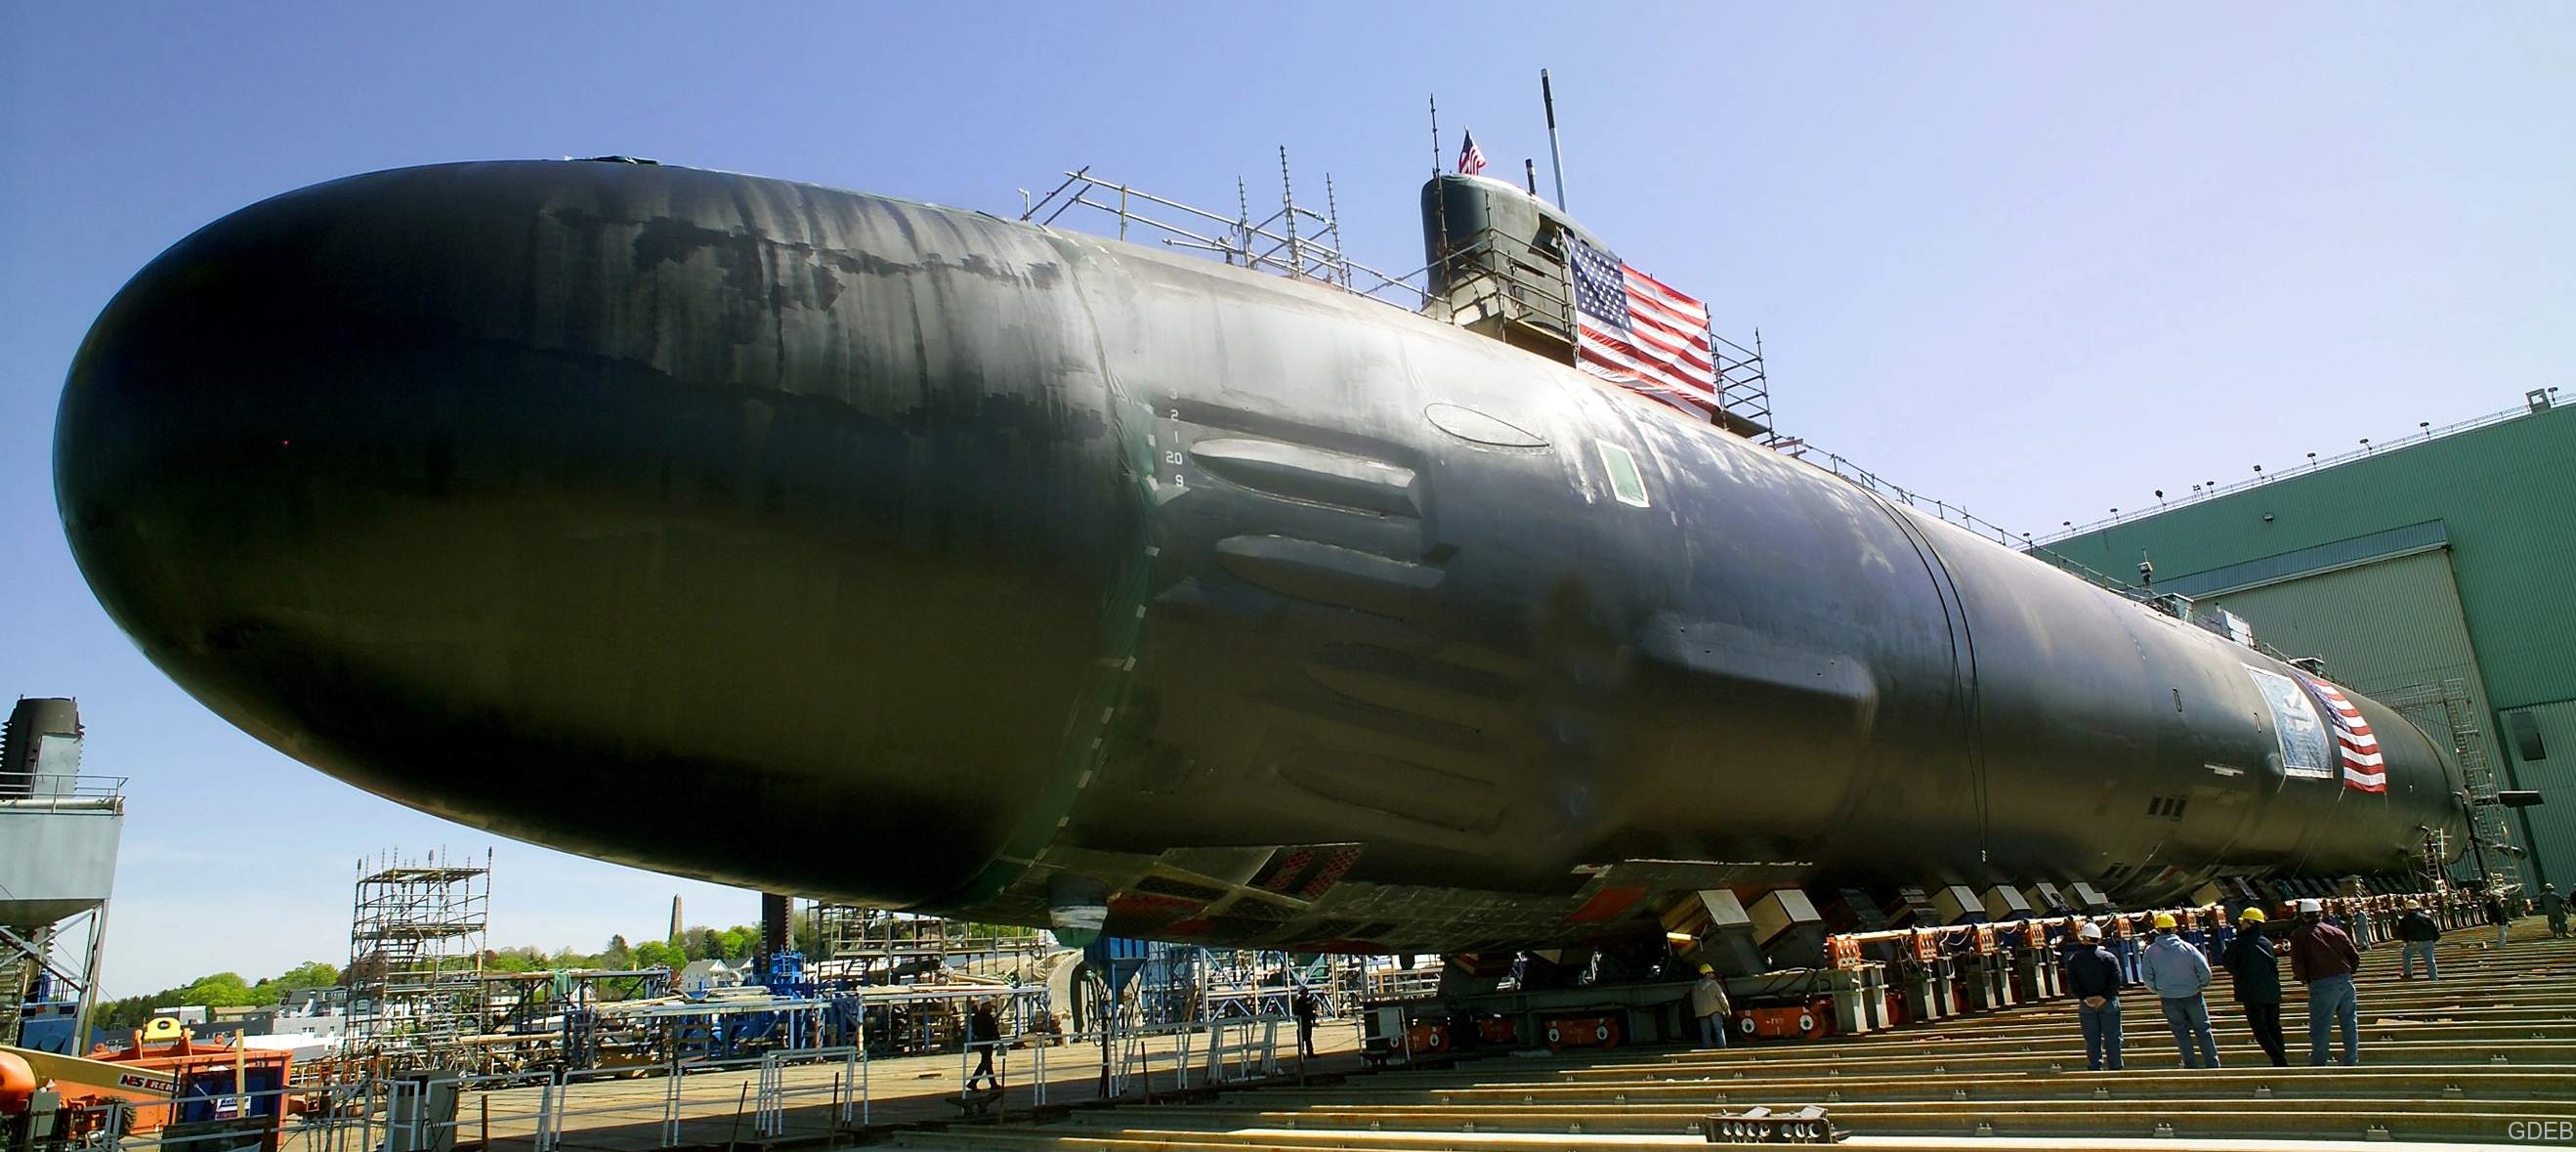 ssn-23 uss jimmy carter seawolf class attack submarine us navy general dynamics electric boat groton connecticut 16